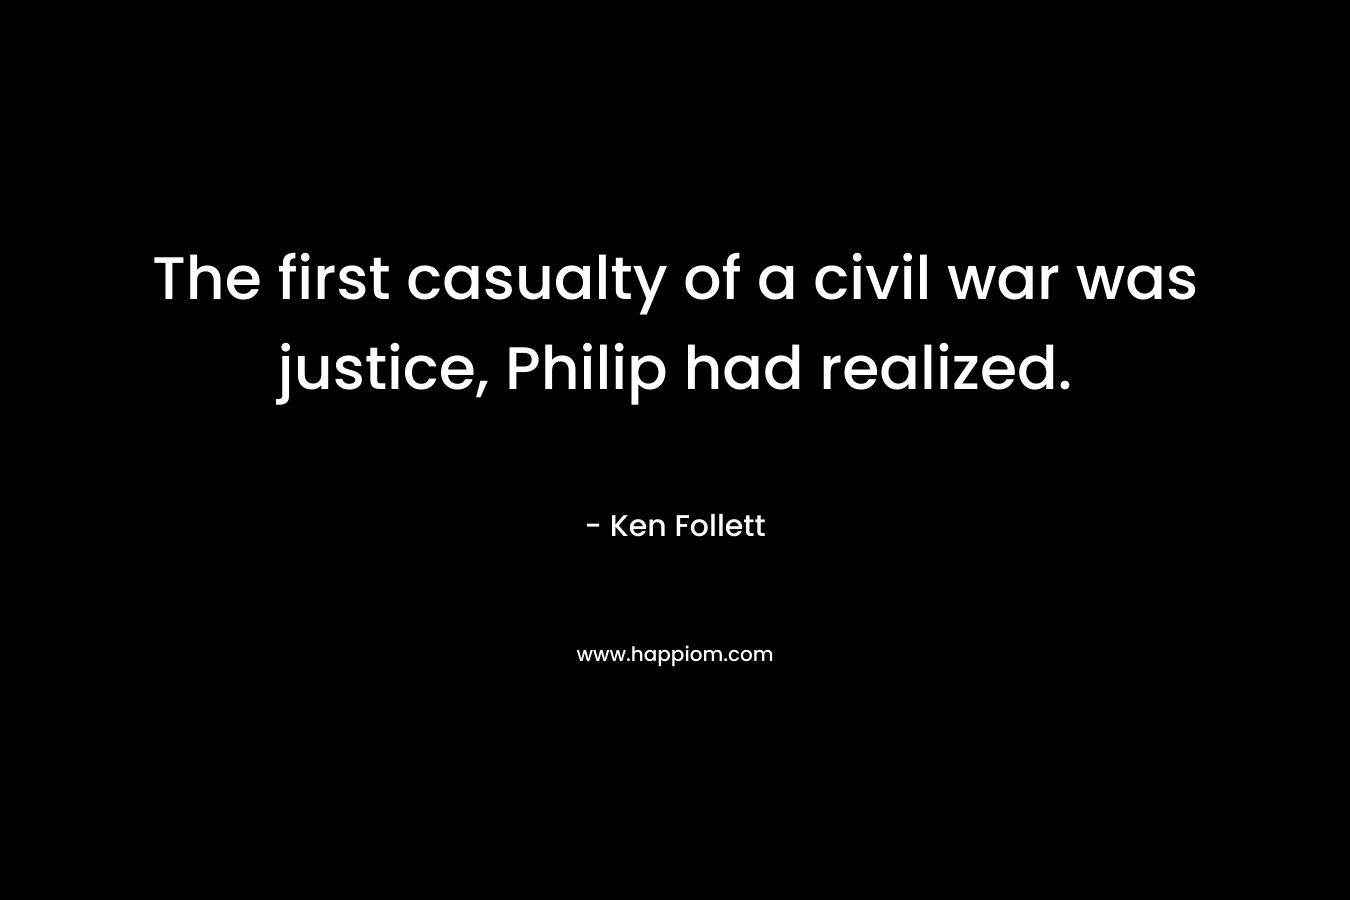 The first casualty of a civil war was justice, Philip had realized. – Ken Follett